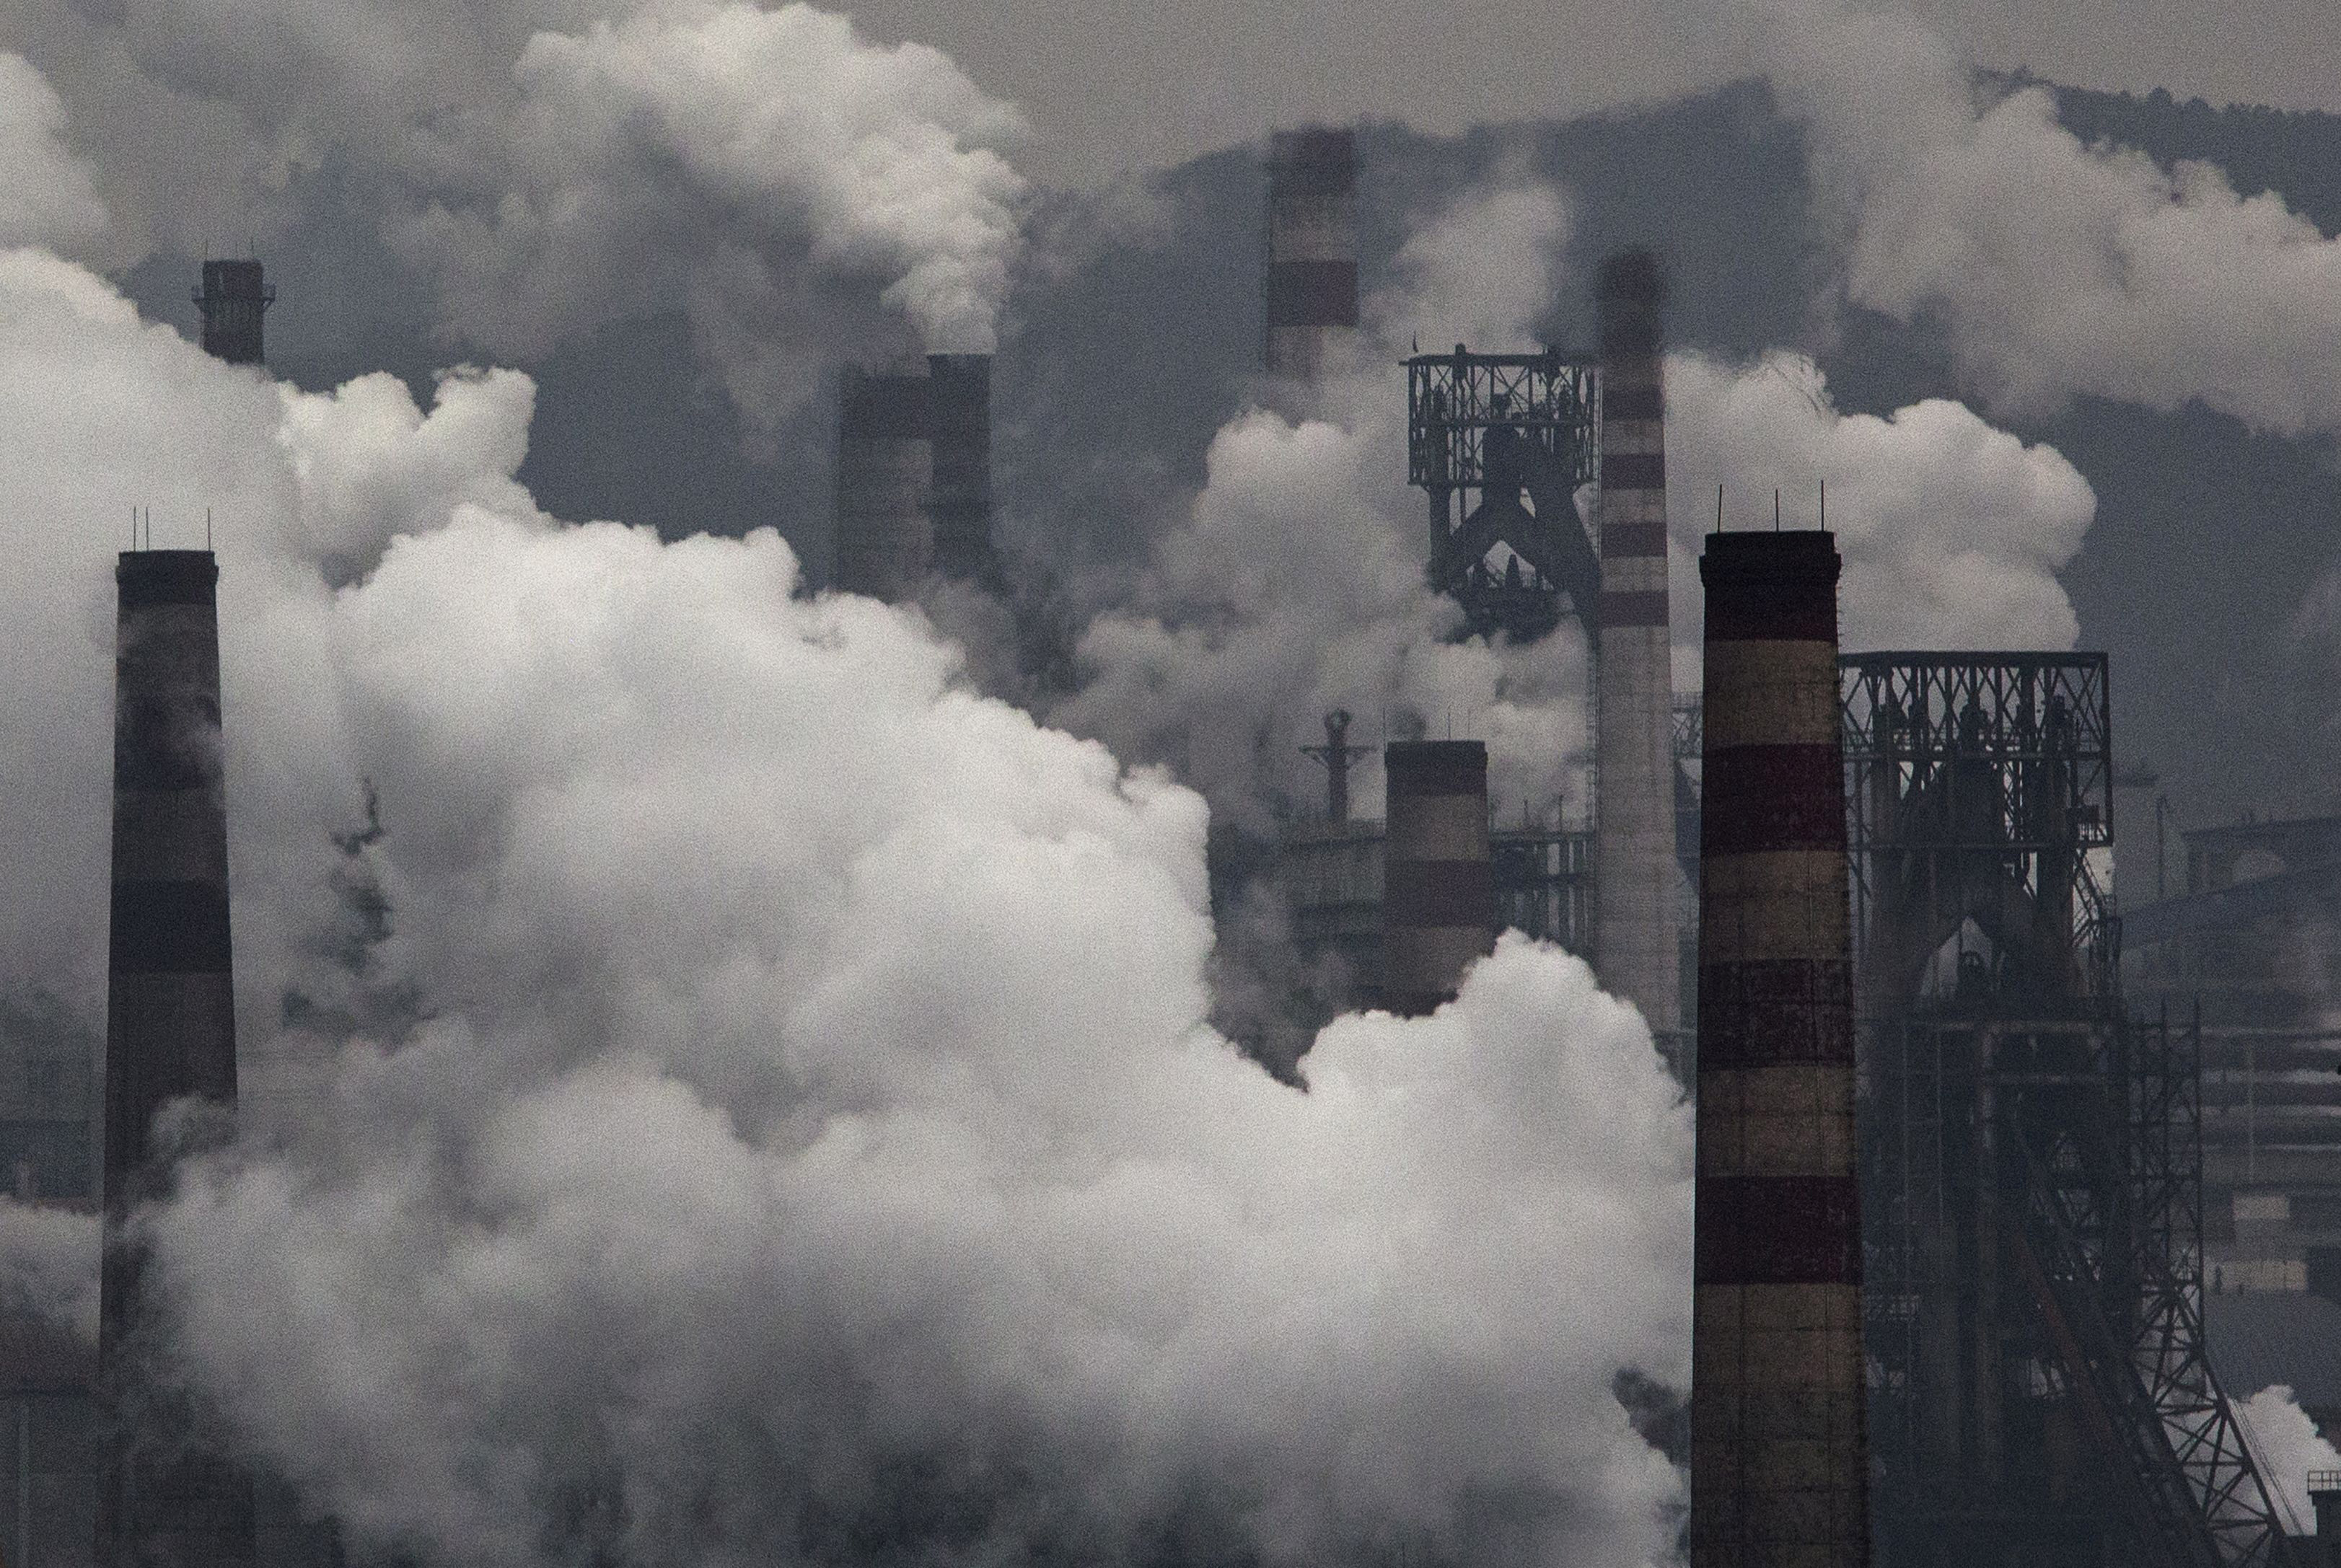 Smoke billows from smokestacks and a coal-fired generator at a steel factory on Nov. 19, 2015, in China's industrial province of Hebei (Kevin Frayer—Getty Images)